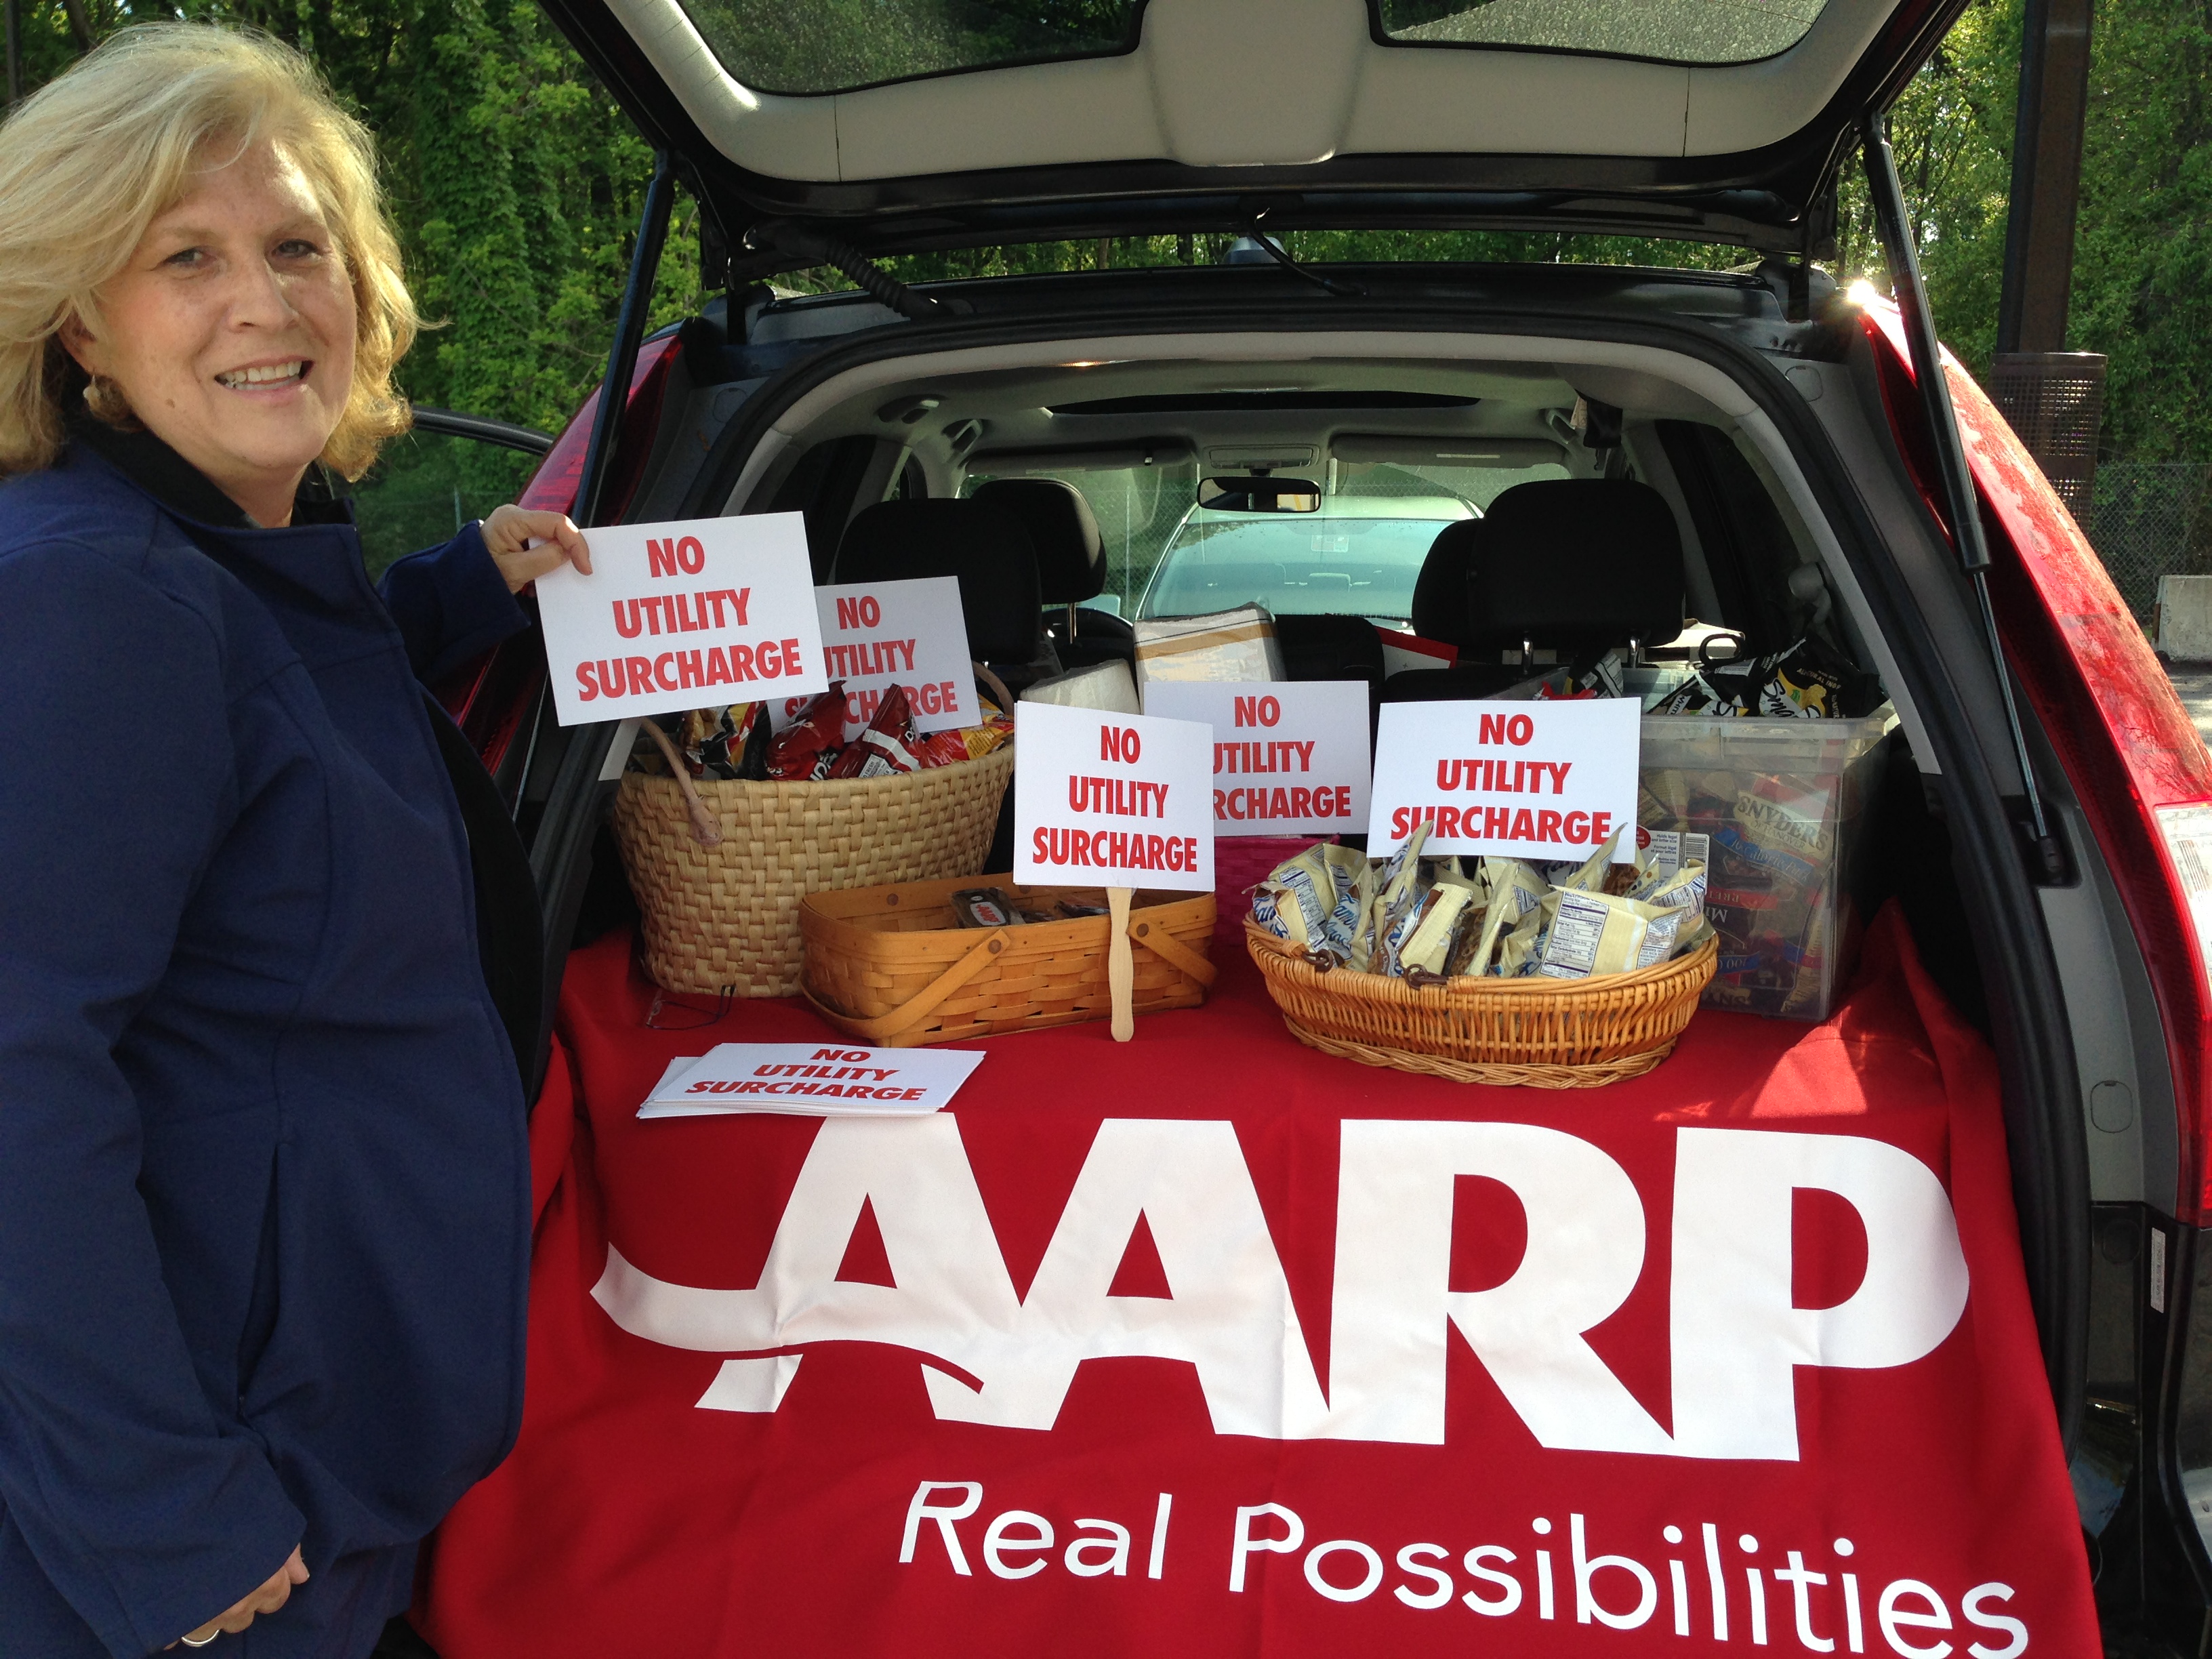 AARP Maryland lobbies regularly for consumers in the utility rate hike fight.